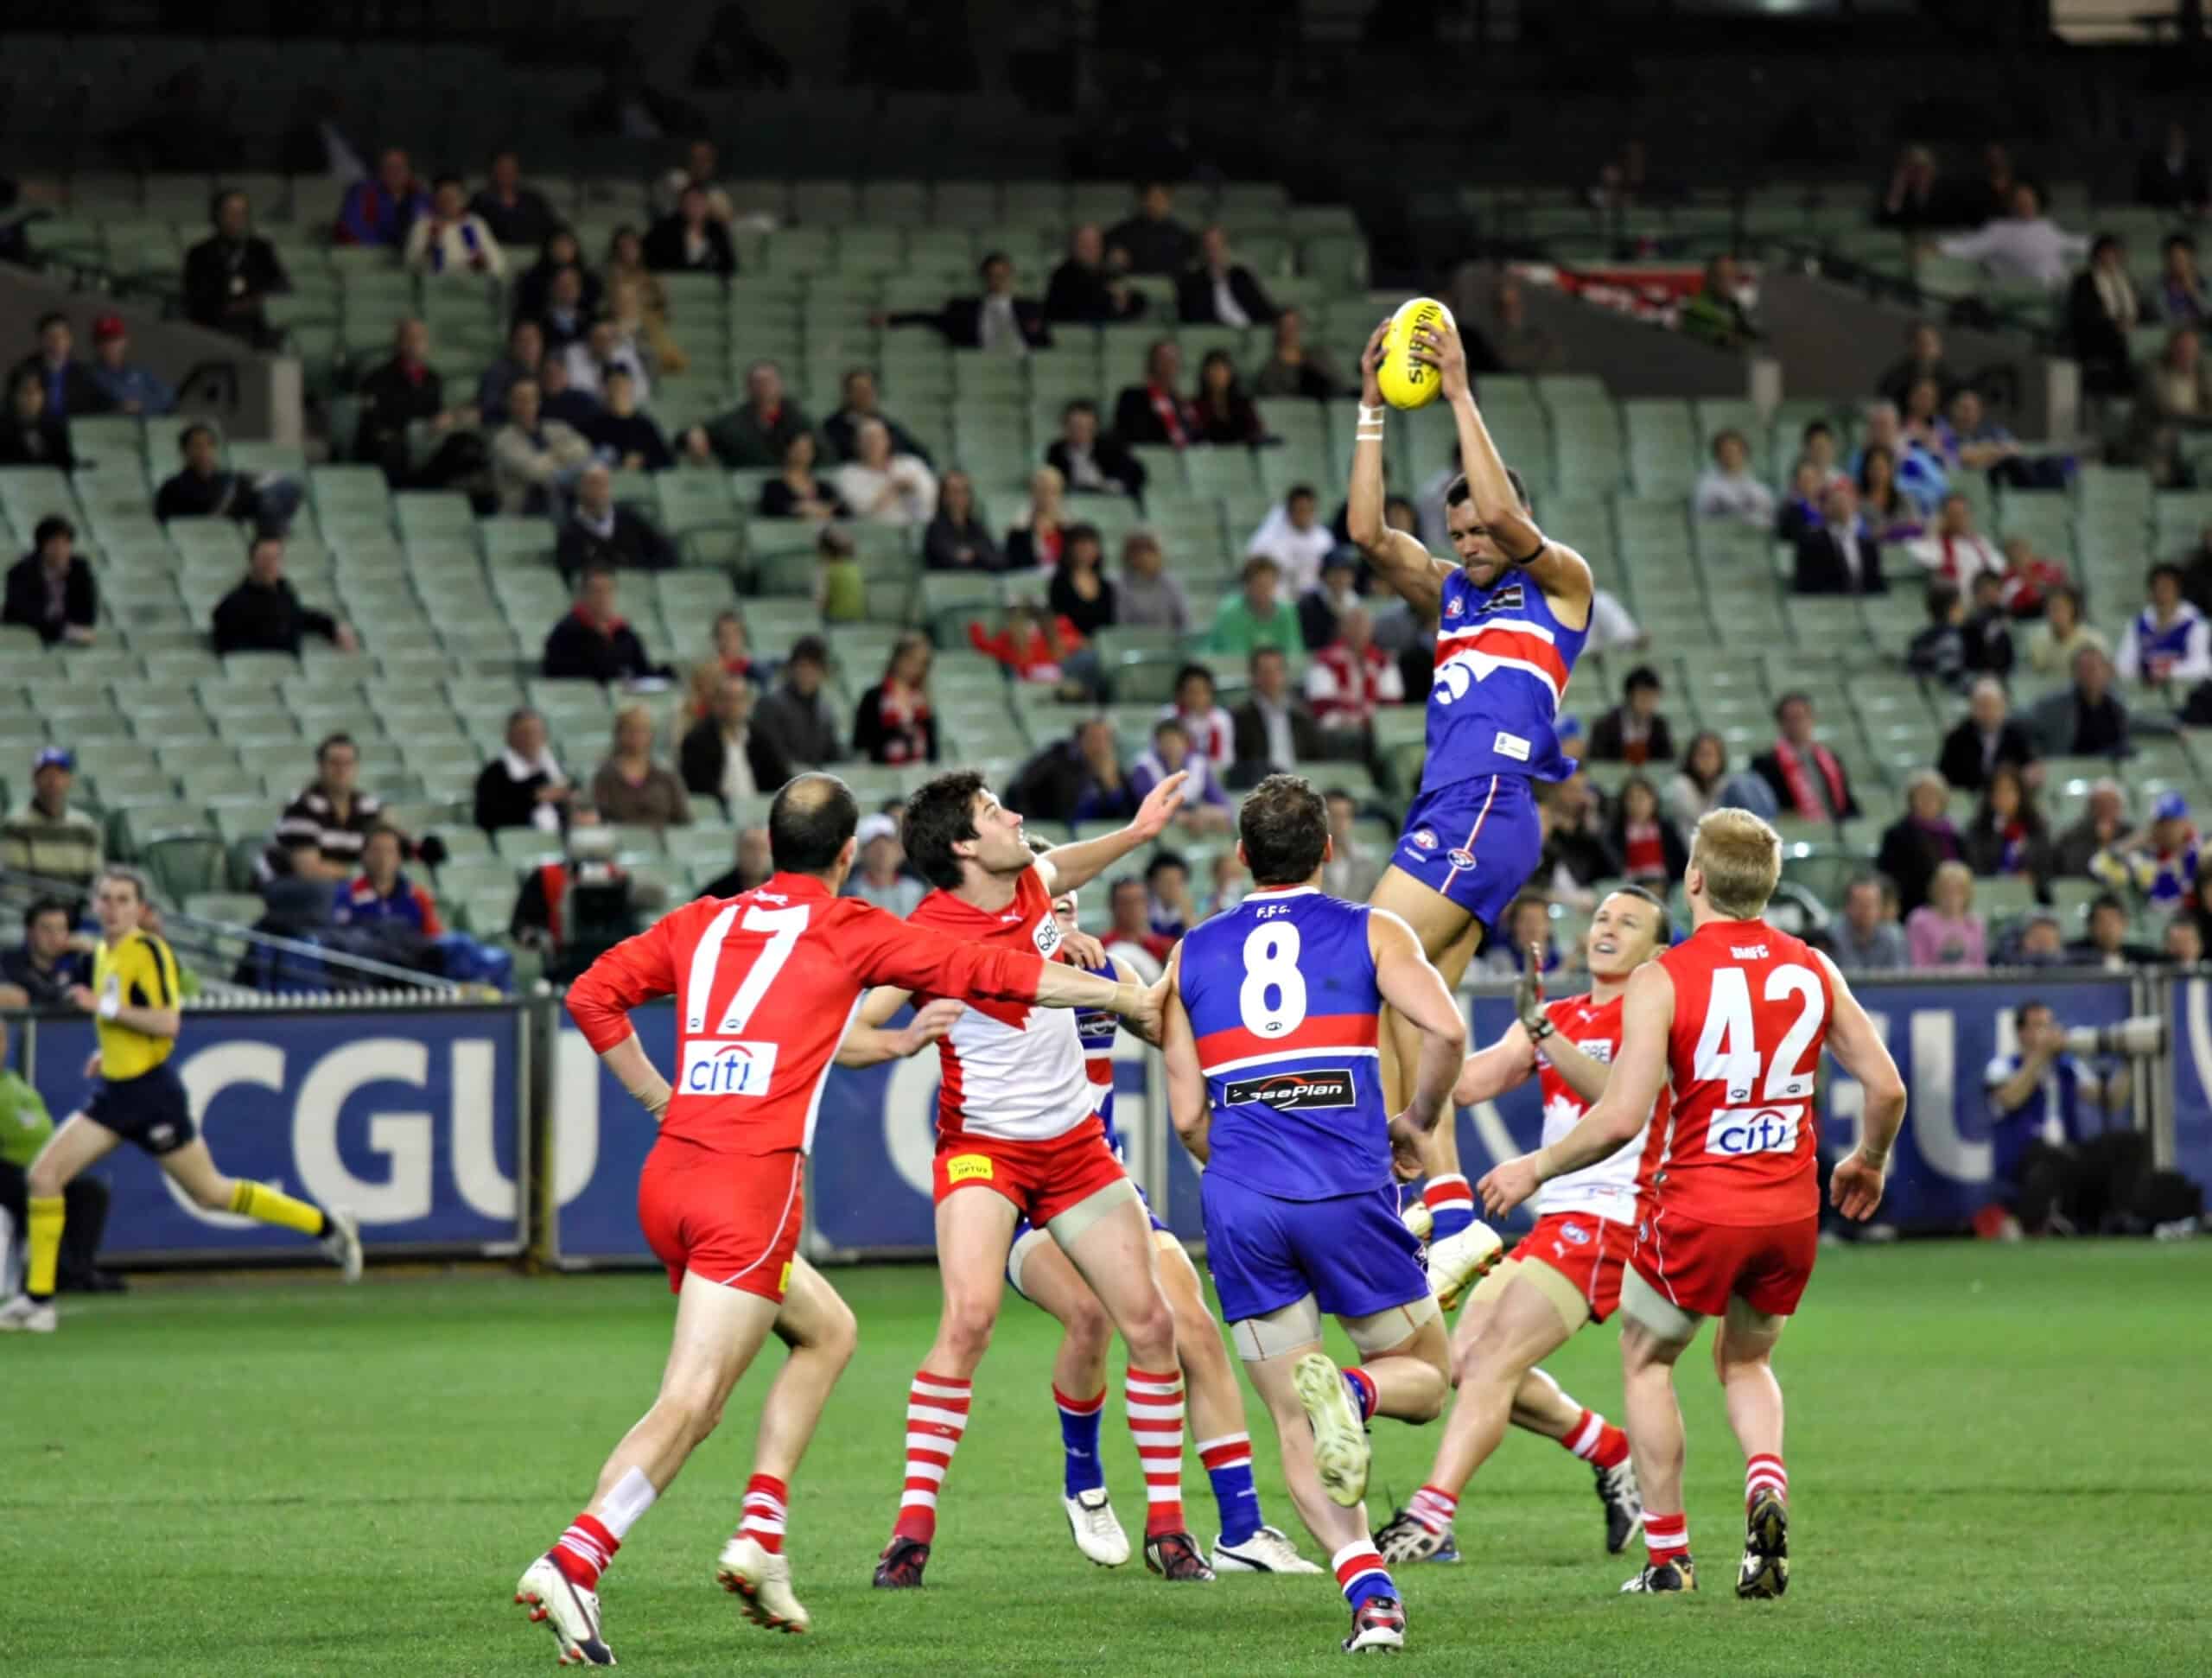 <p>Dive into the world of Australian Rules Football, and you might just find every other sporting event tame by comparison. Known colloquially as “footy,” these matches blend the excitement of soccer, rugby, and Gaelic football into a uniquely gripping spectacle that commands the attention of its audience with relentless energy and pace. </p> <p>The atmosphere at an AFL game is nothing short of electric — from the roaring crowds and heart-stopping plays to the communal spirit that sweeps through the stands. Once you’ve experienced the fervor of fans cheering under the stadium lights, other sports might just lose a bit of their luster.</p>